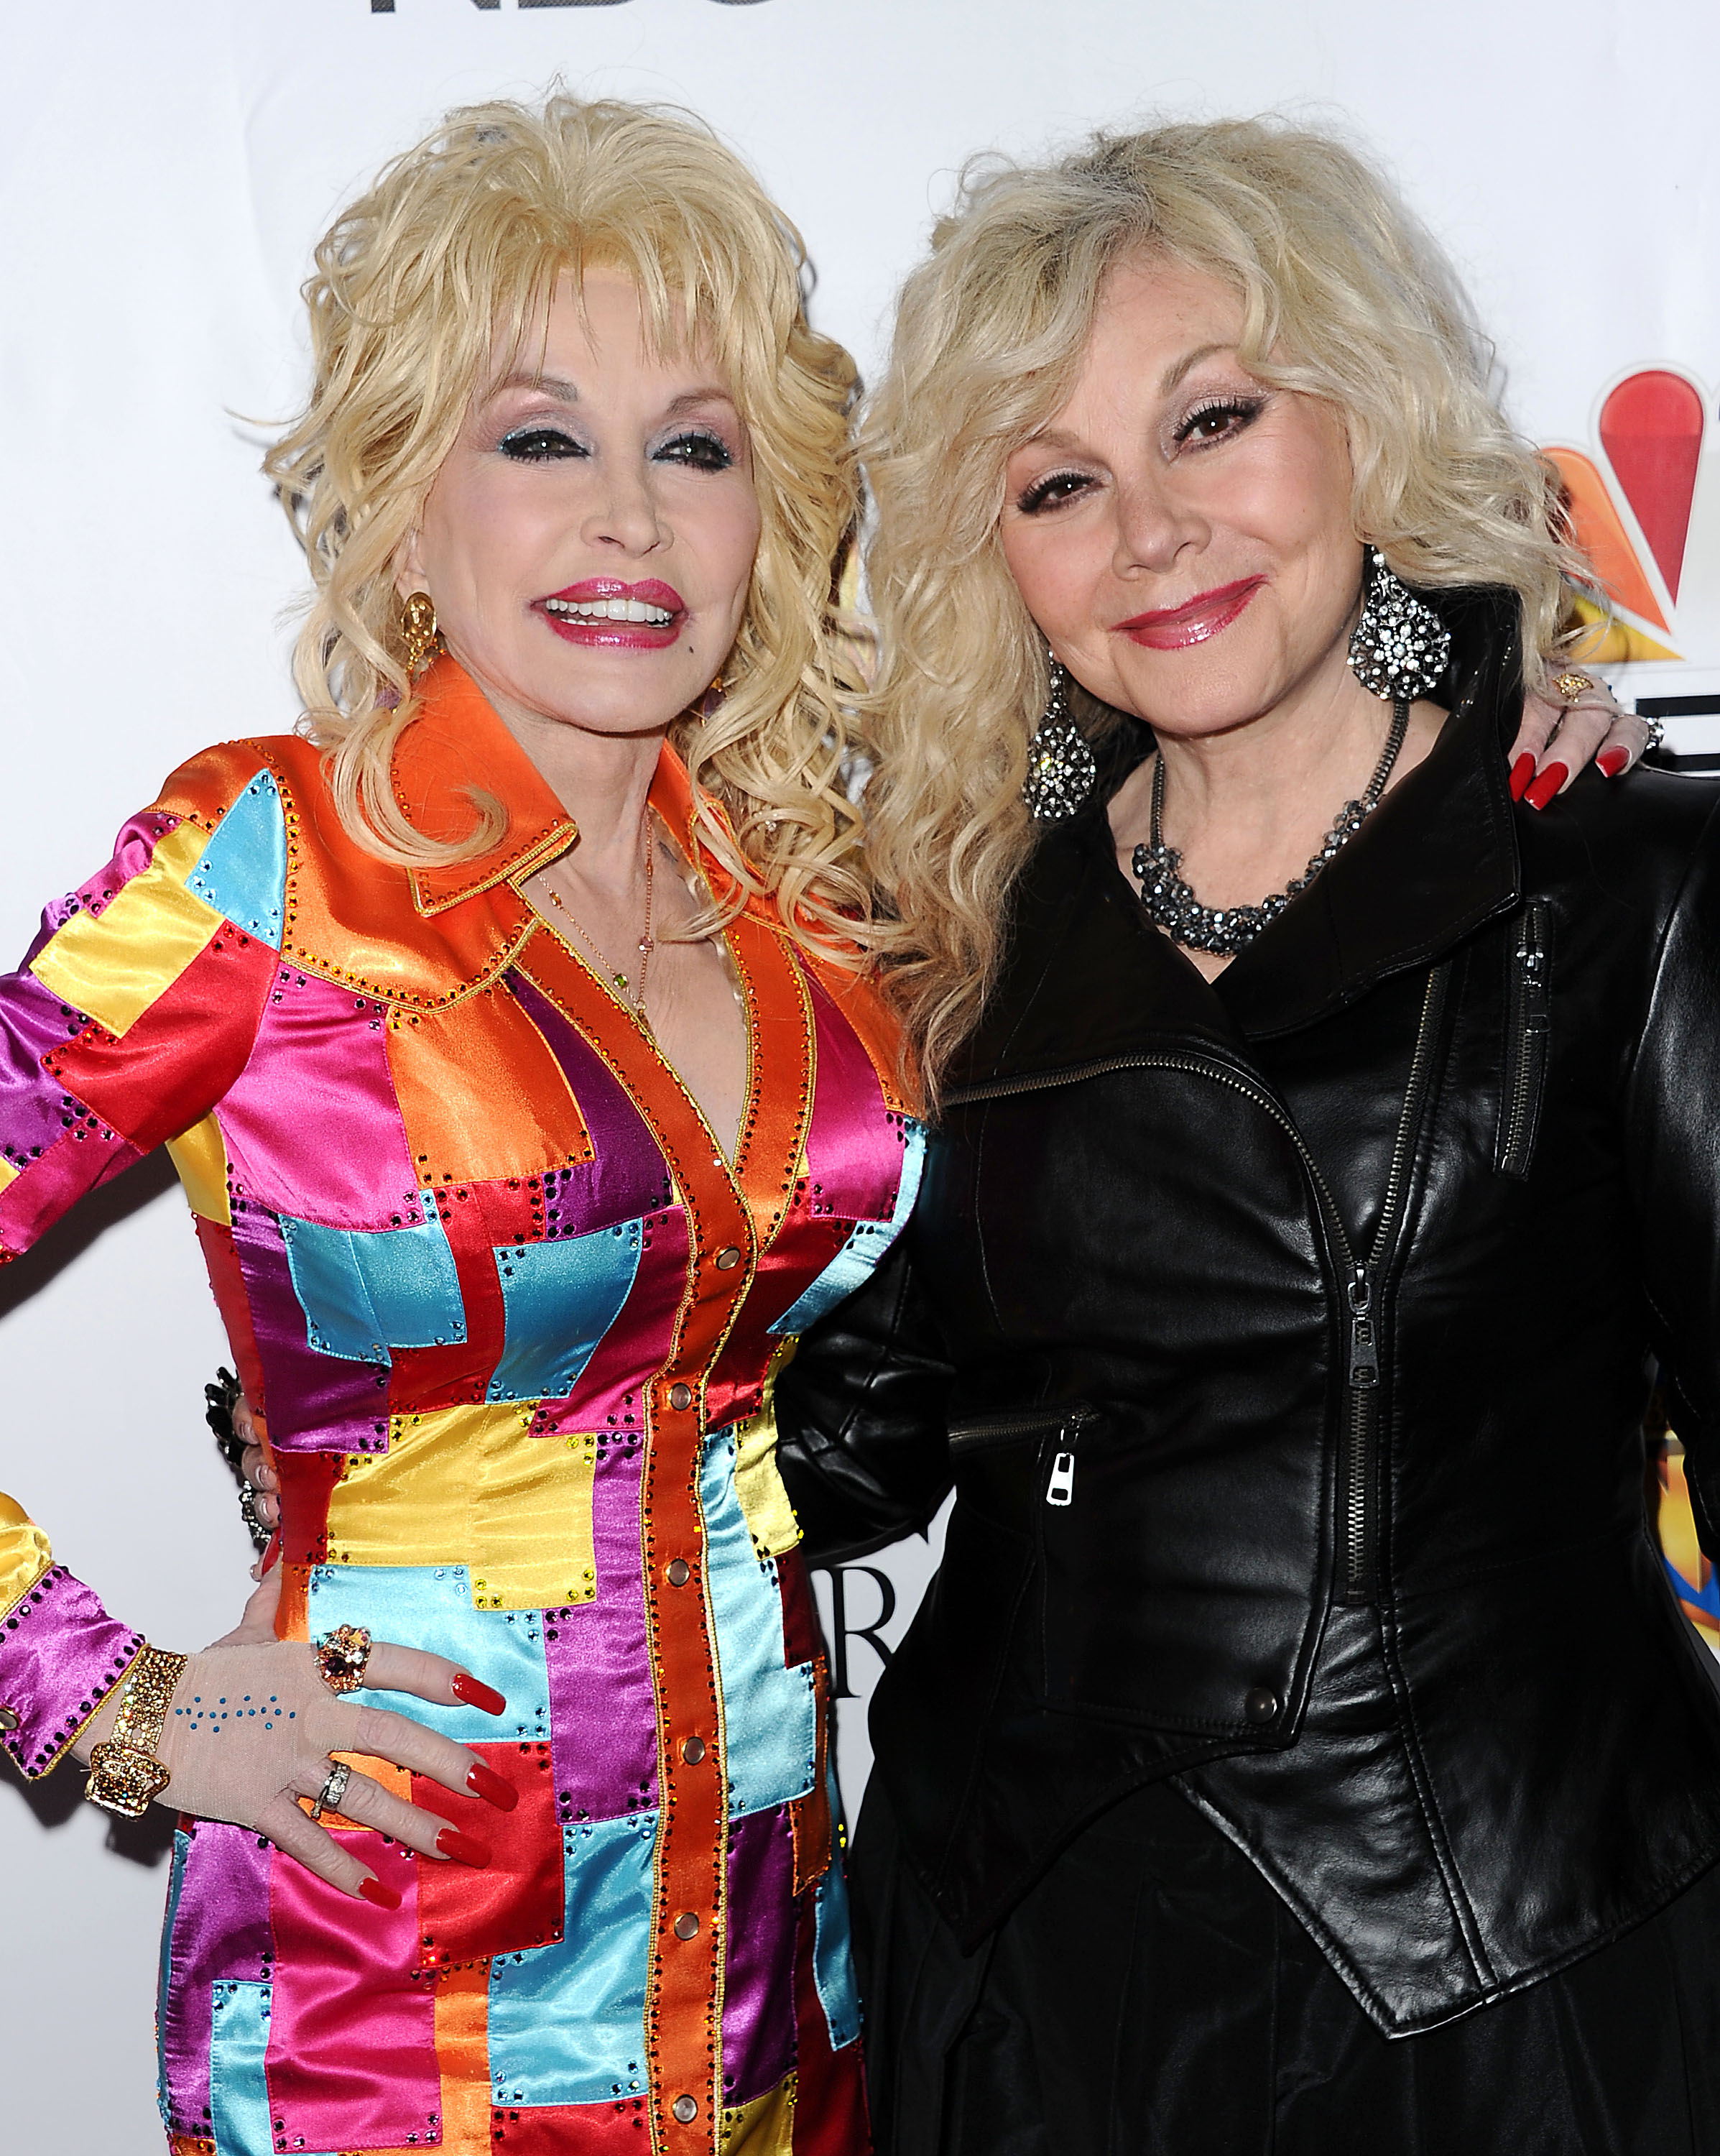 Dolly and Stella Parton at the premiere of "Dolly Parton's Coat of Many Colors" in Hollywood, California on December 2, 2015 | Source: Getty Images